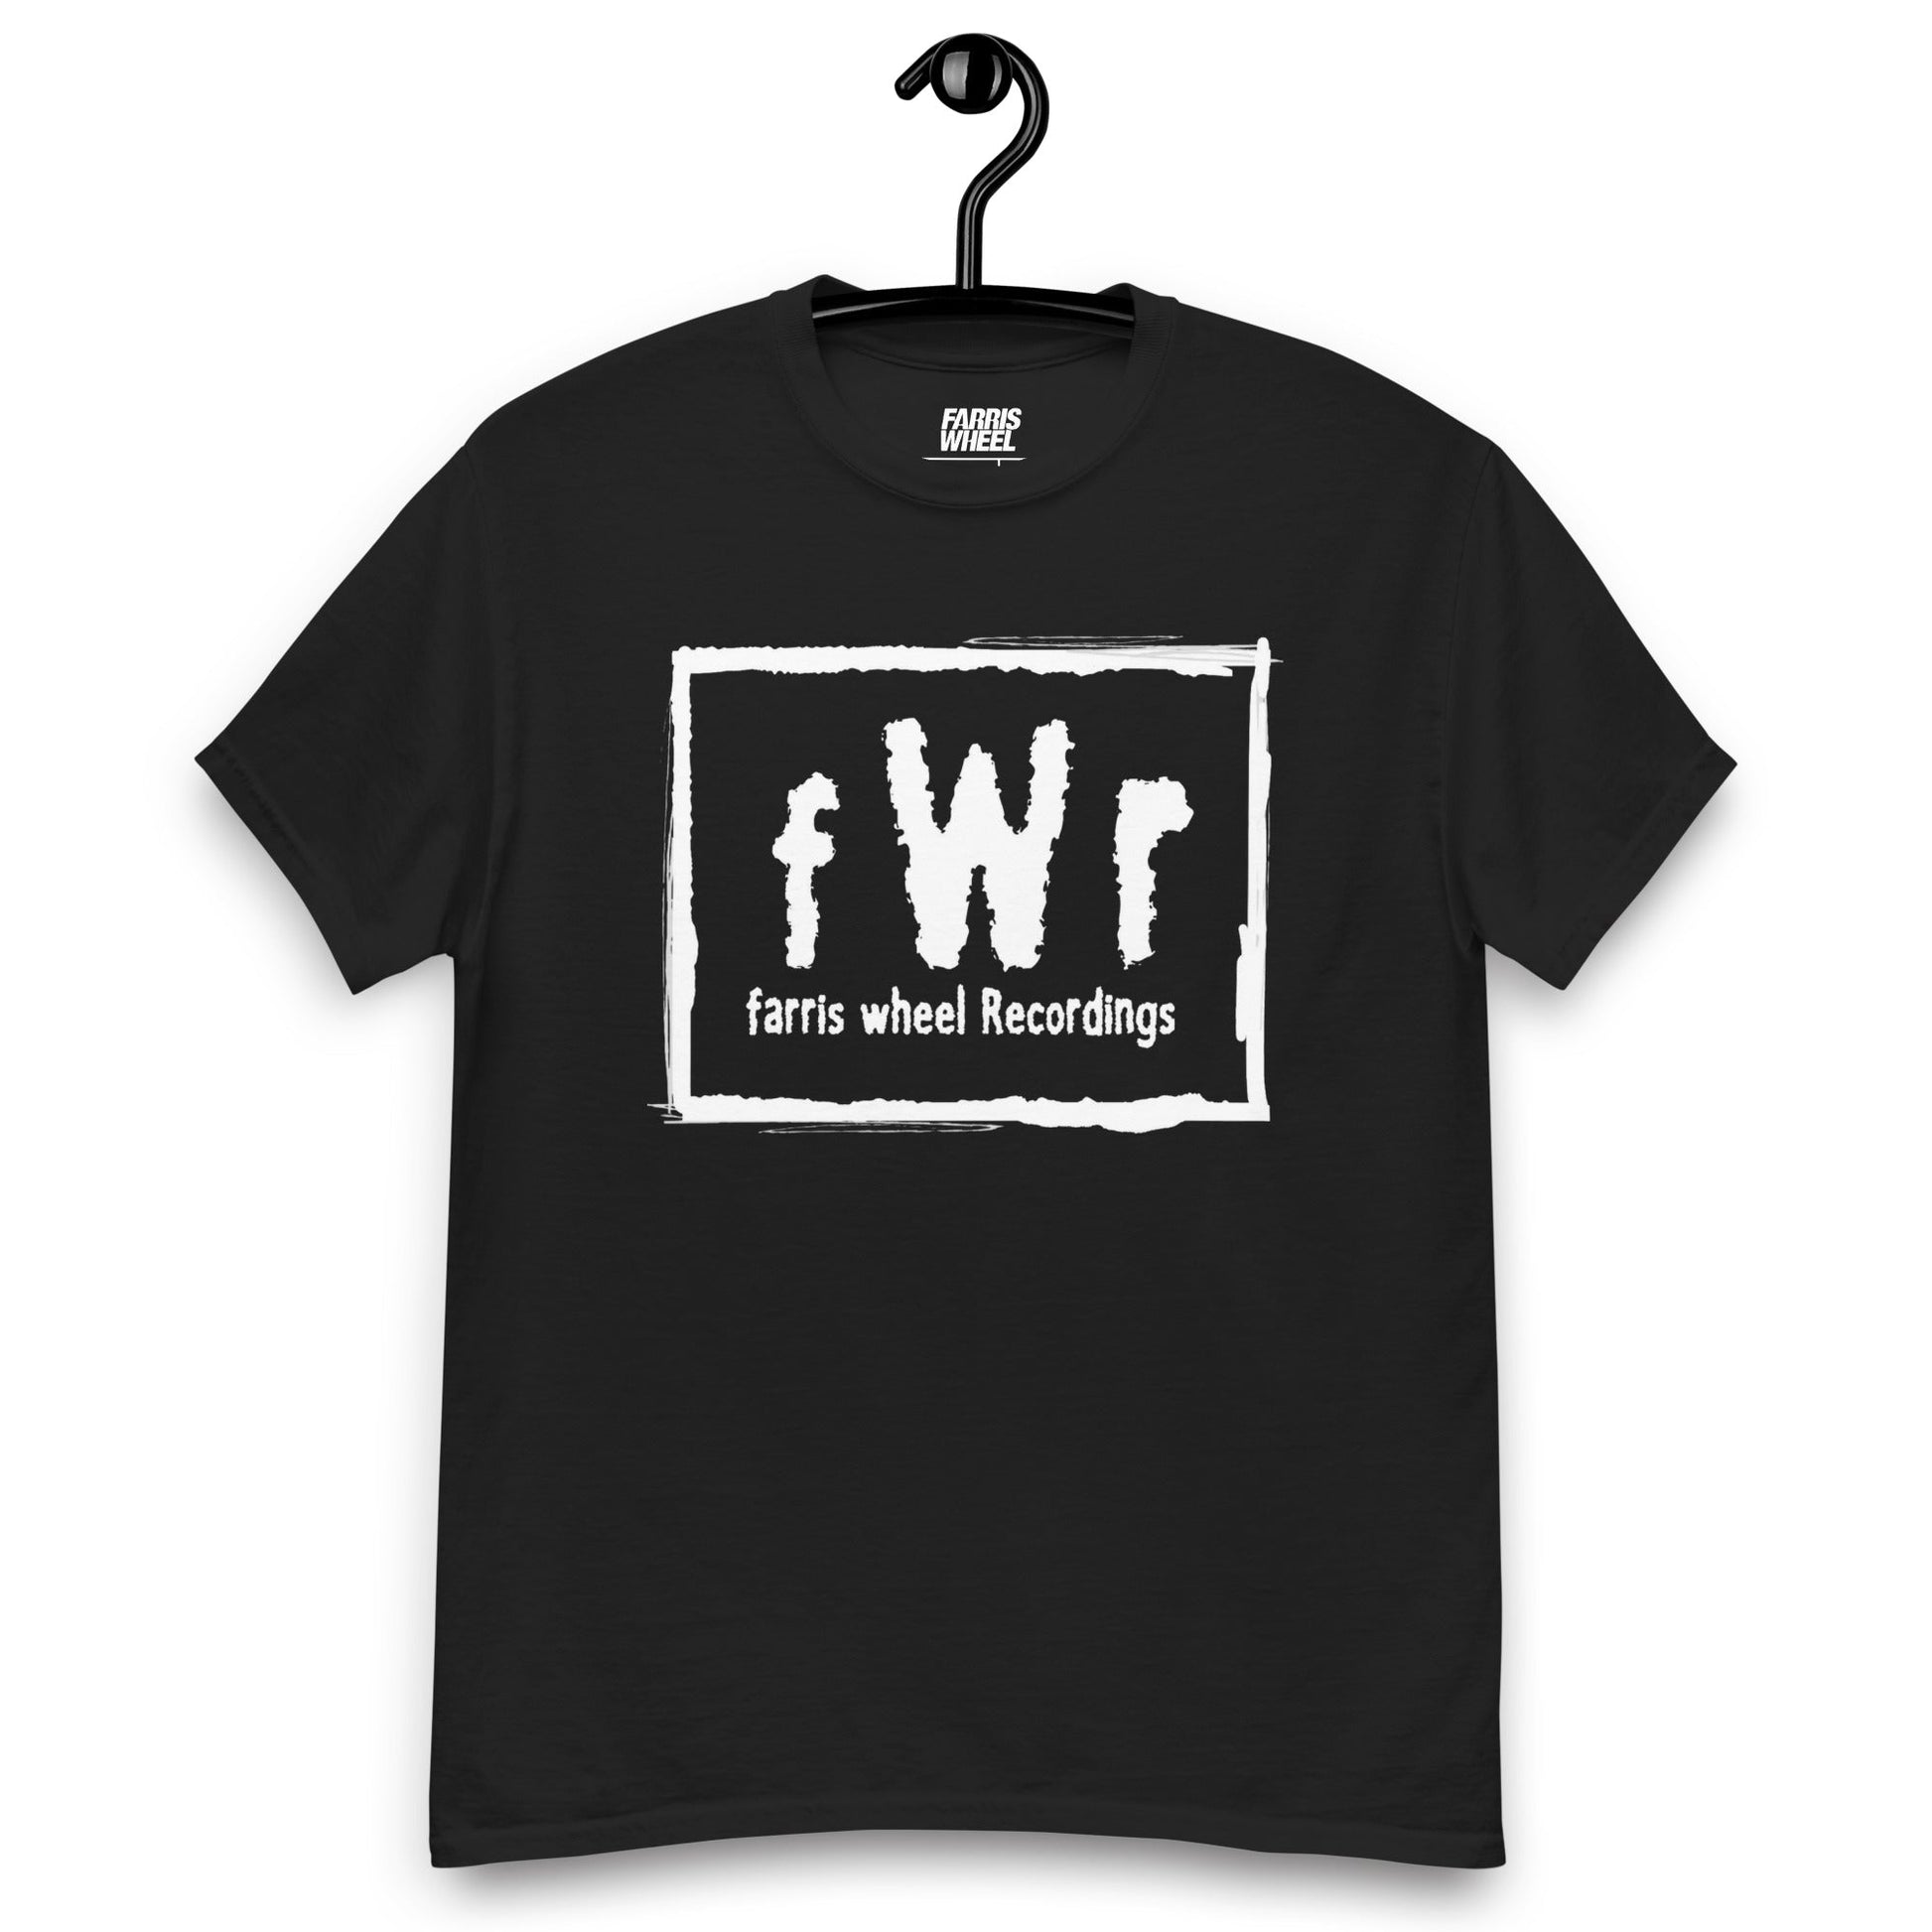 Farris Wheel fWr Men's Classic Tee - BeExtra! Apparel & More